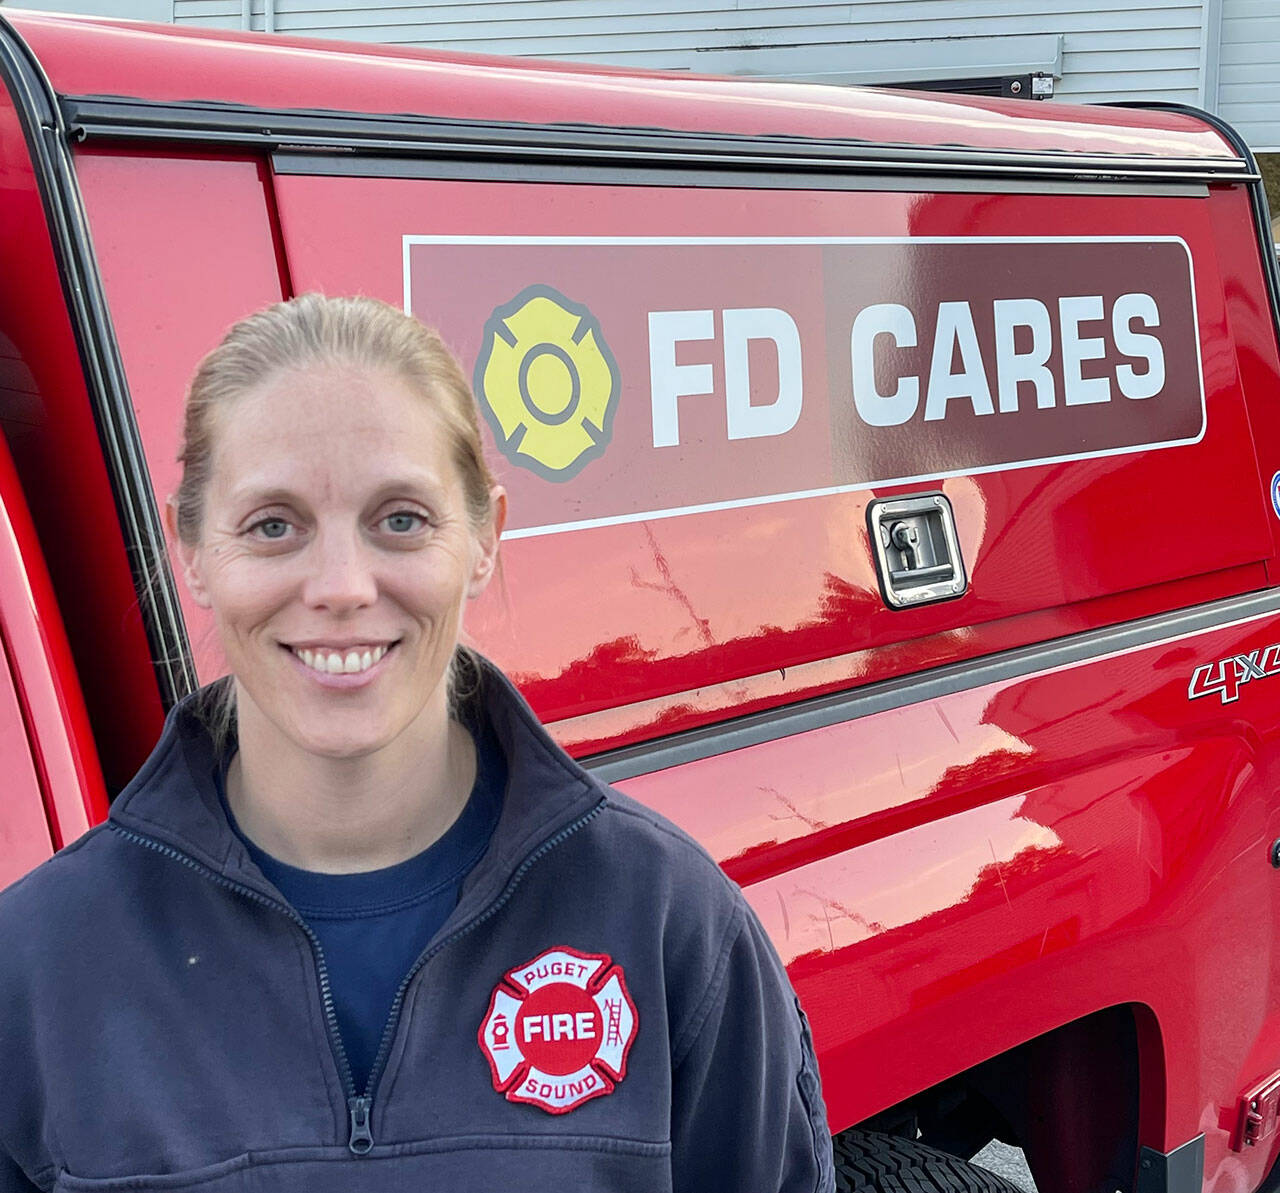 Nancy Reynolds of the Puget Sound Fire FD Cares program that is contracting with the Kent Police Department to serve as co-responders on certain calls. COURTESY PHOTO, Puget Sound Fire